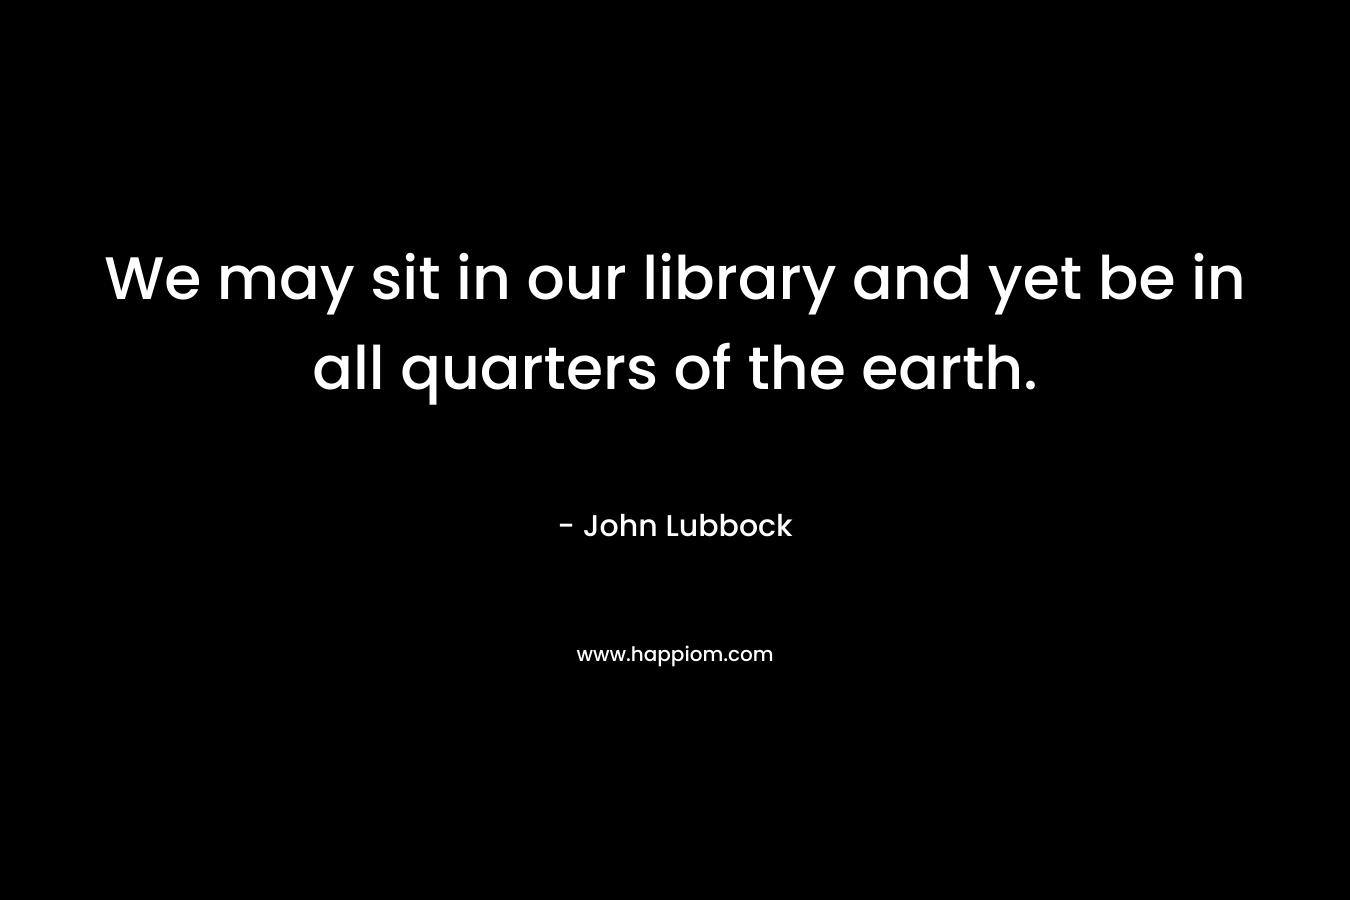 We may sit in our library and yet be in all quarters of the earth. – John Lubbock